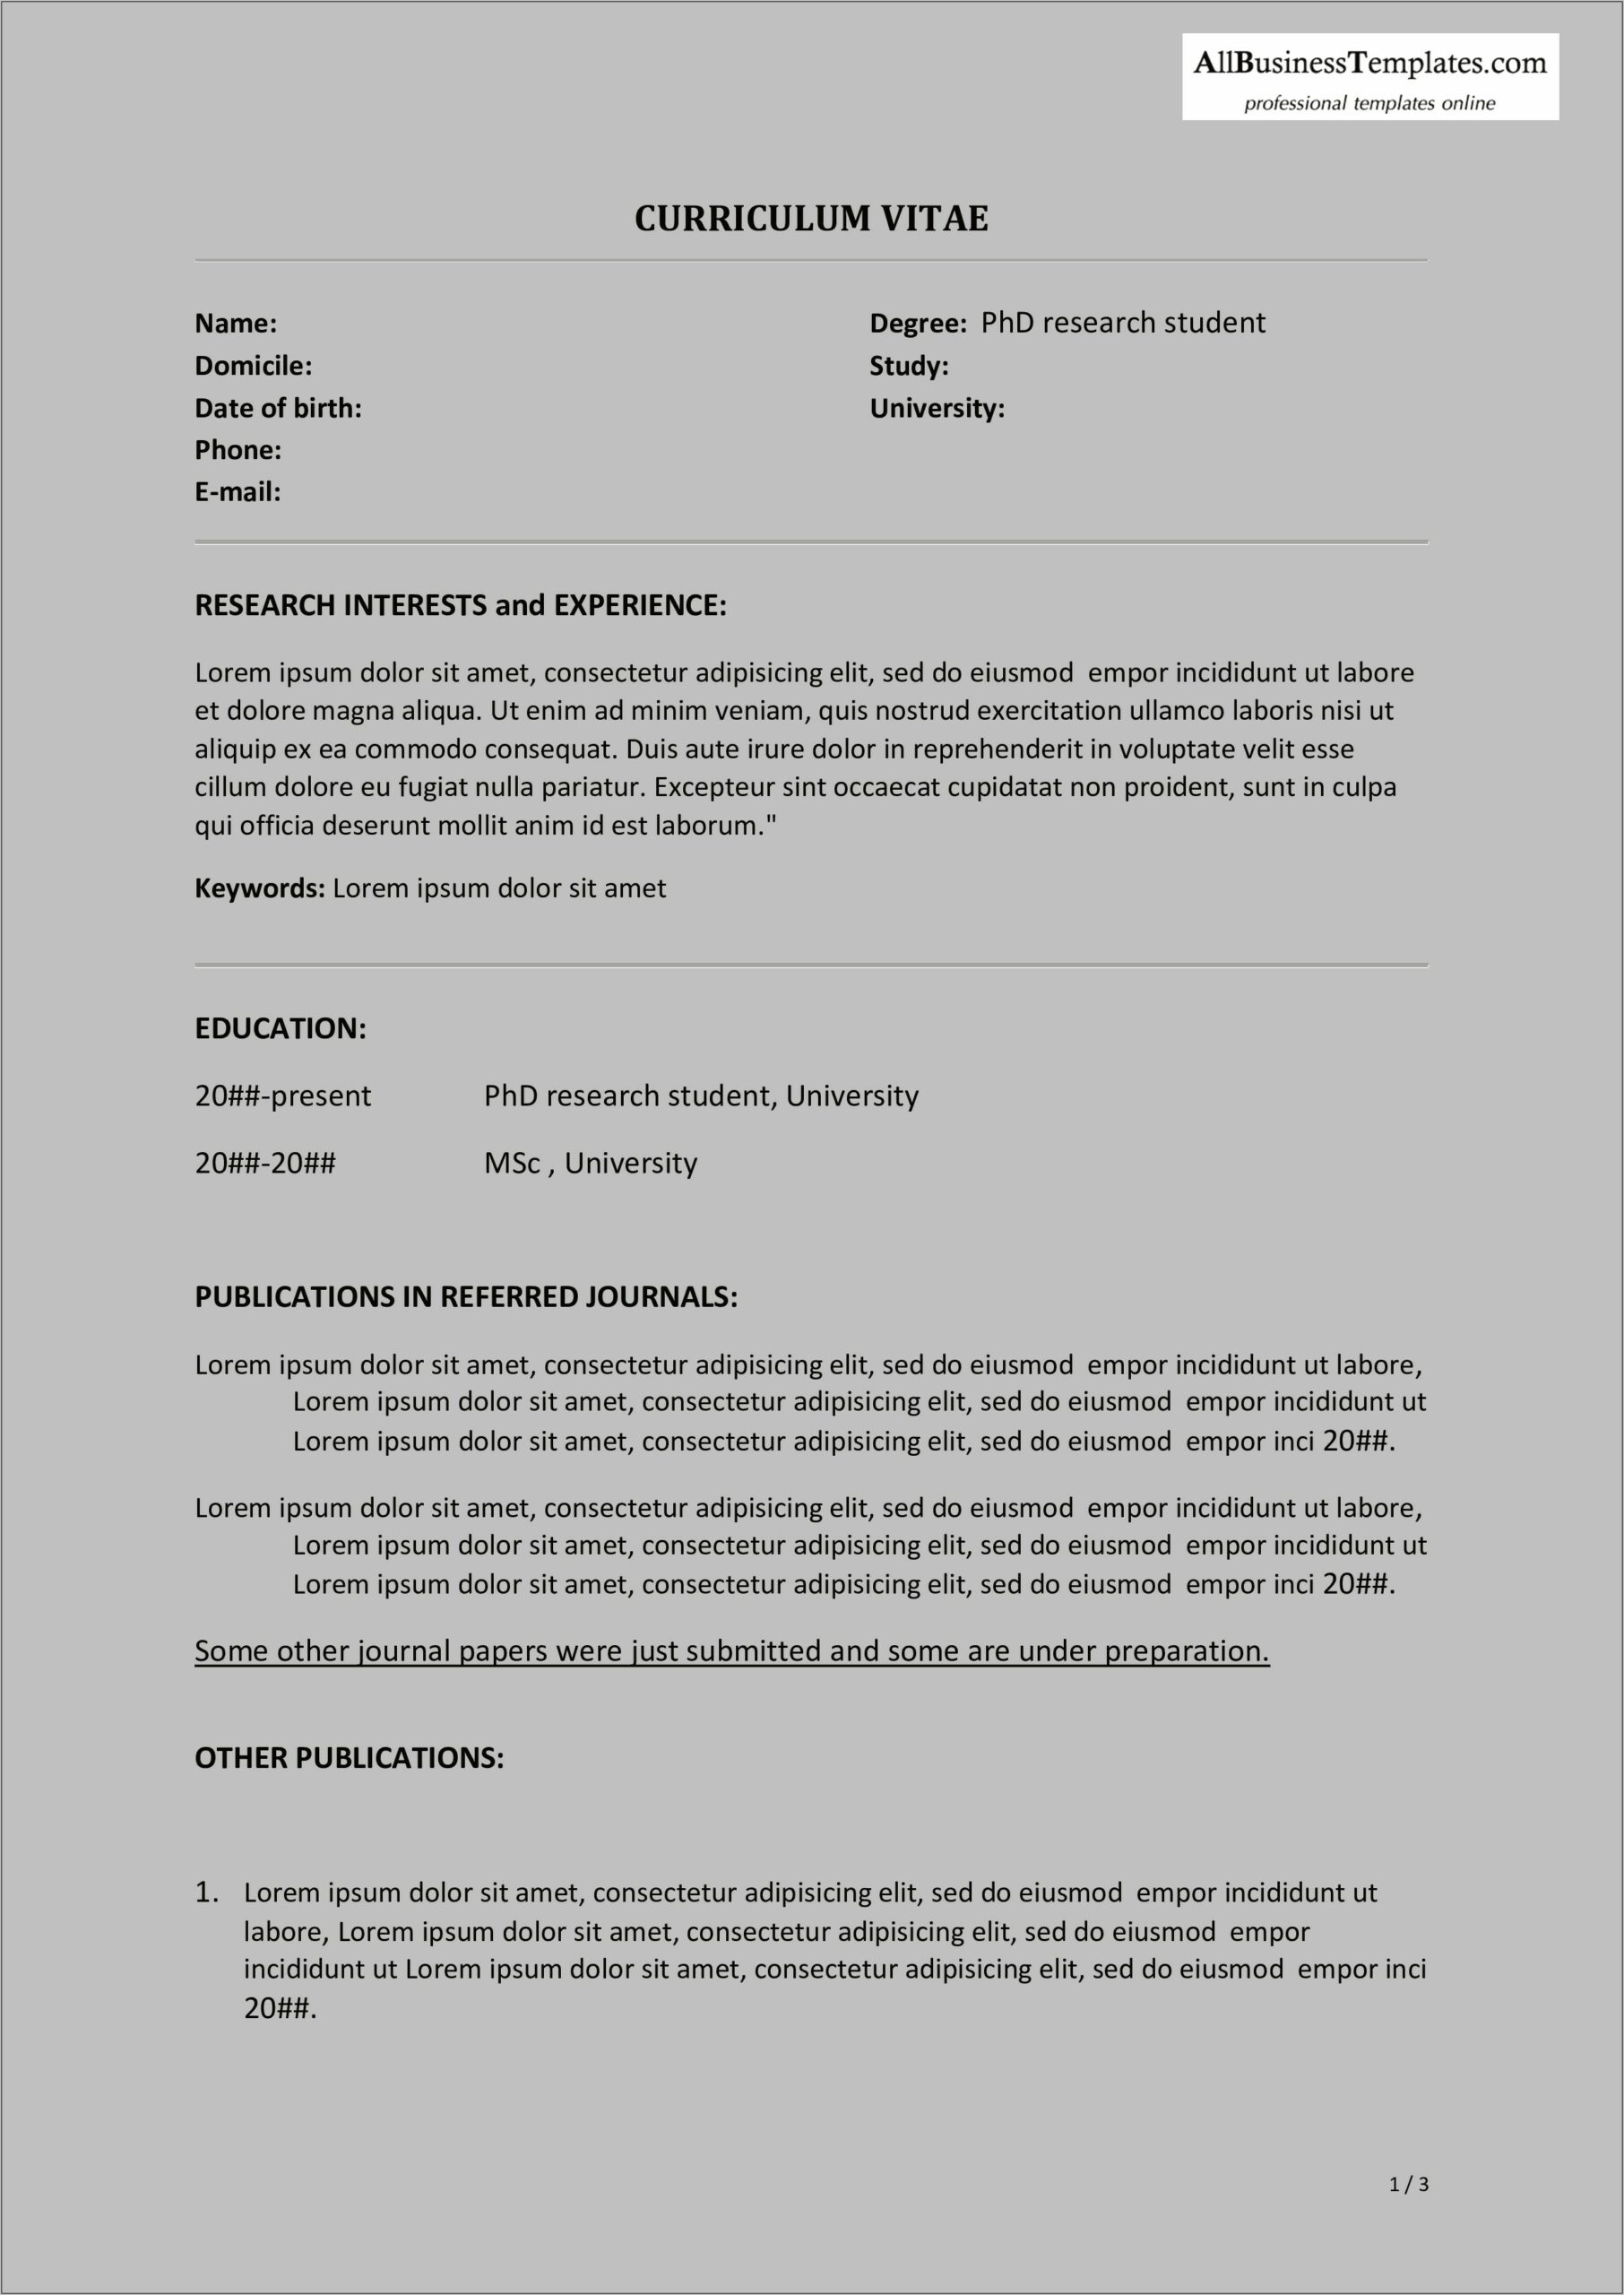 Resume Objective For Phd Application